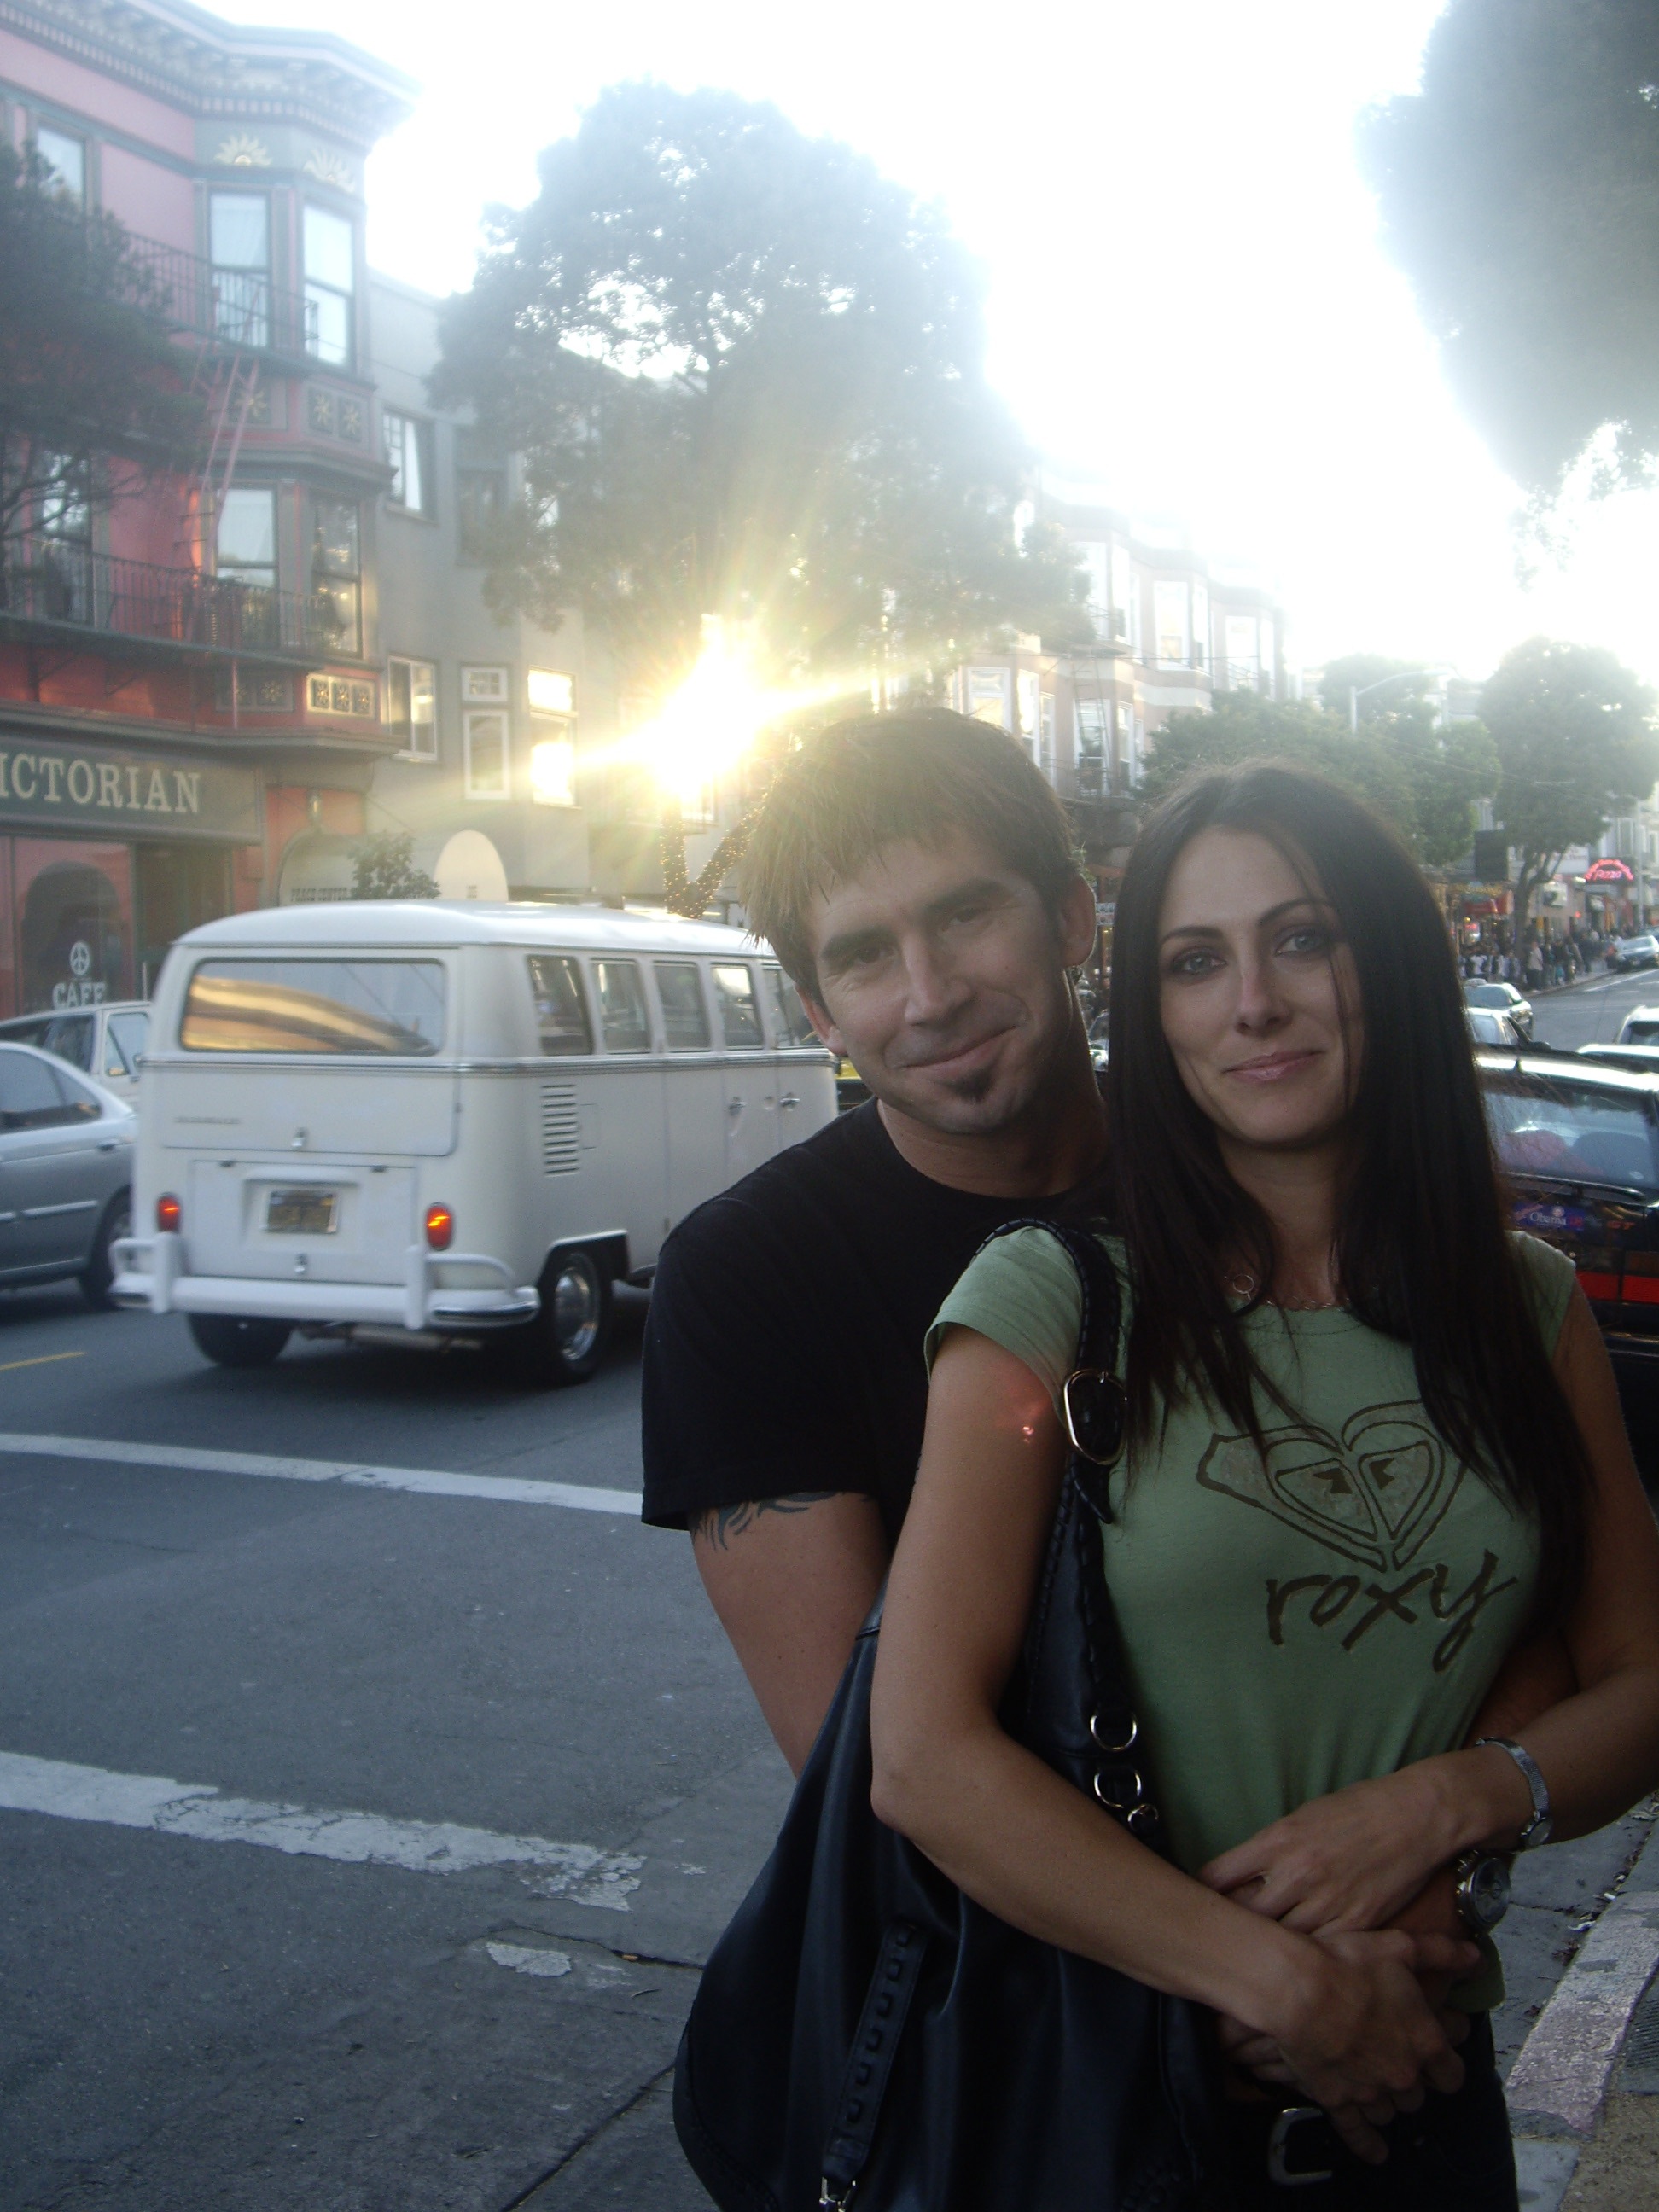 exfiance and I in sf